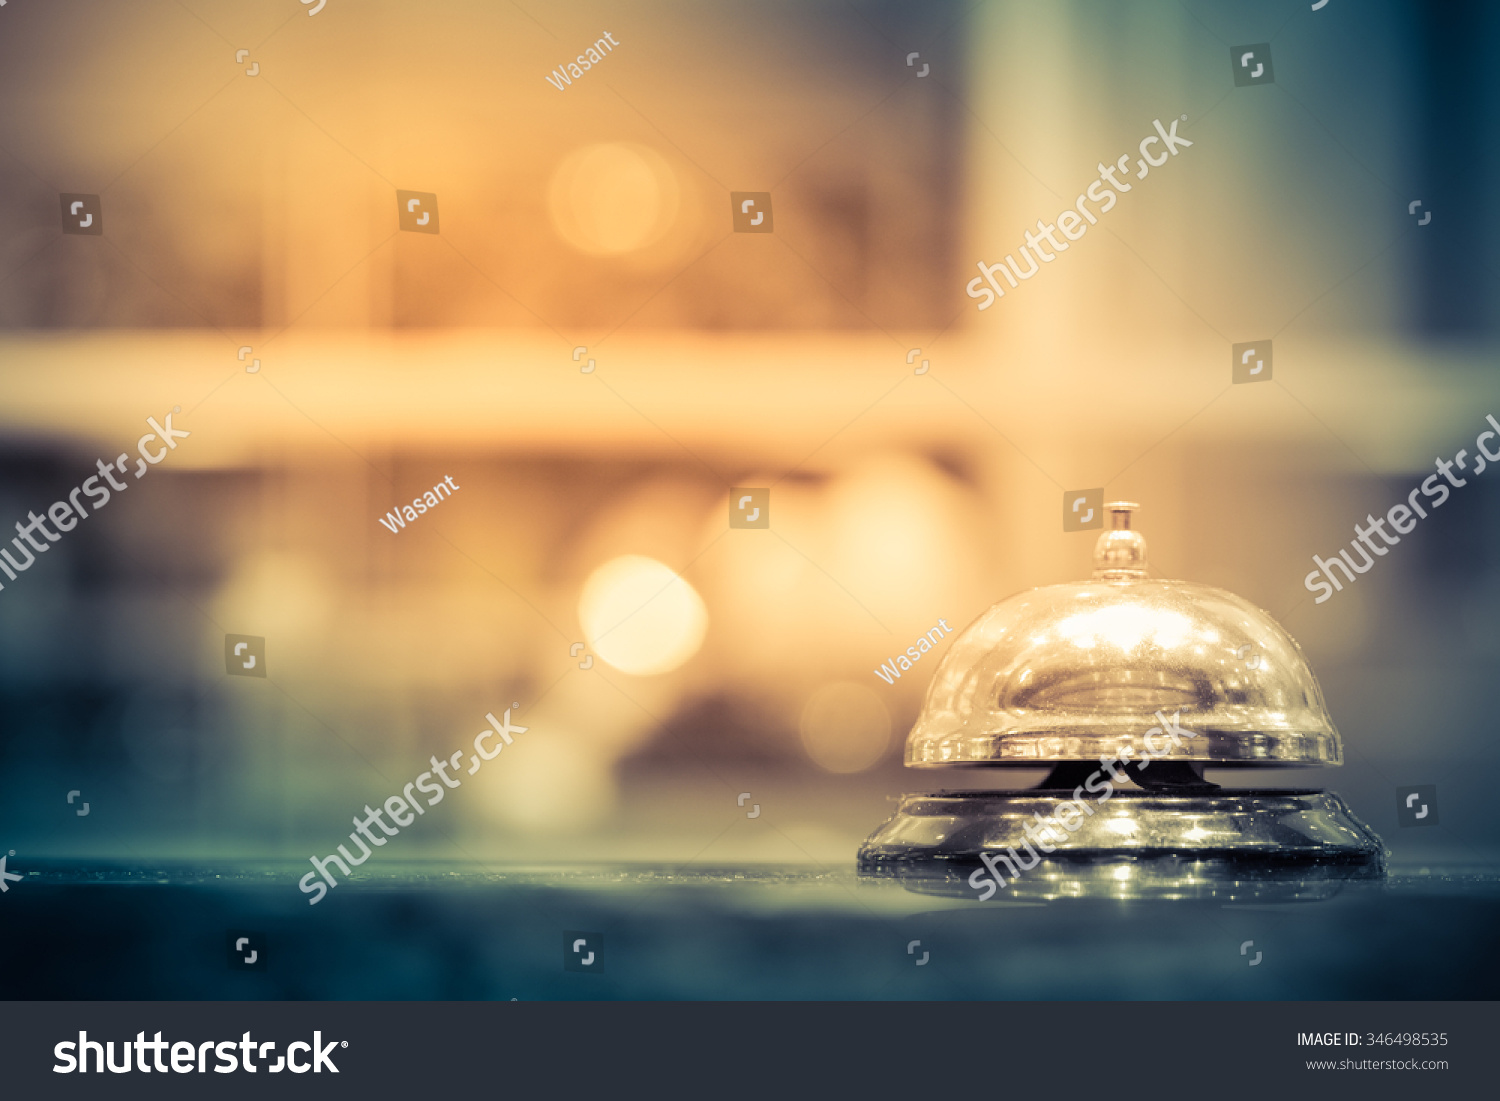 Restaurant bell vintage with bokeh #346498535